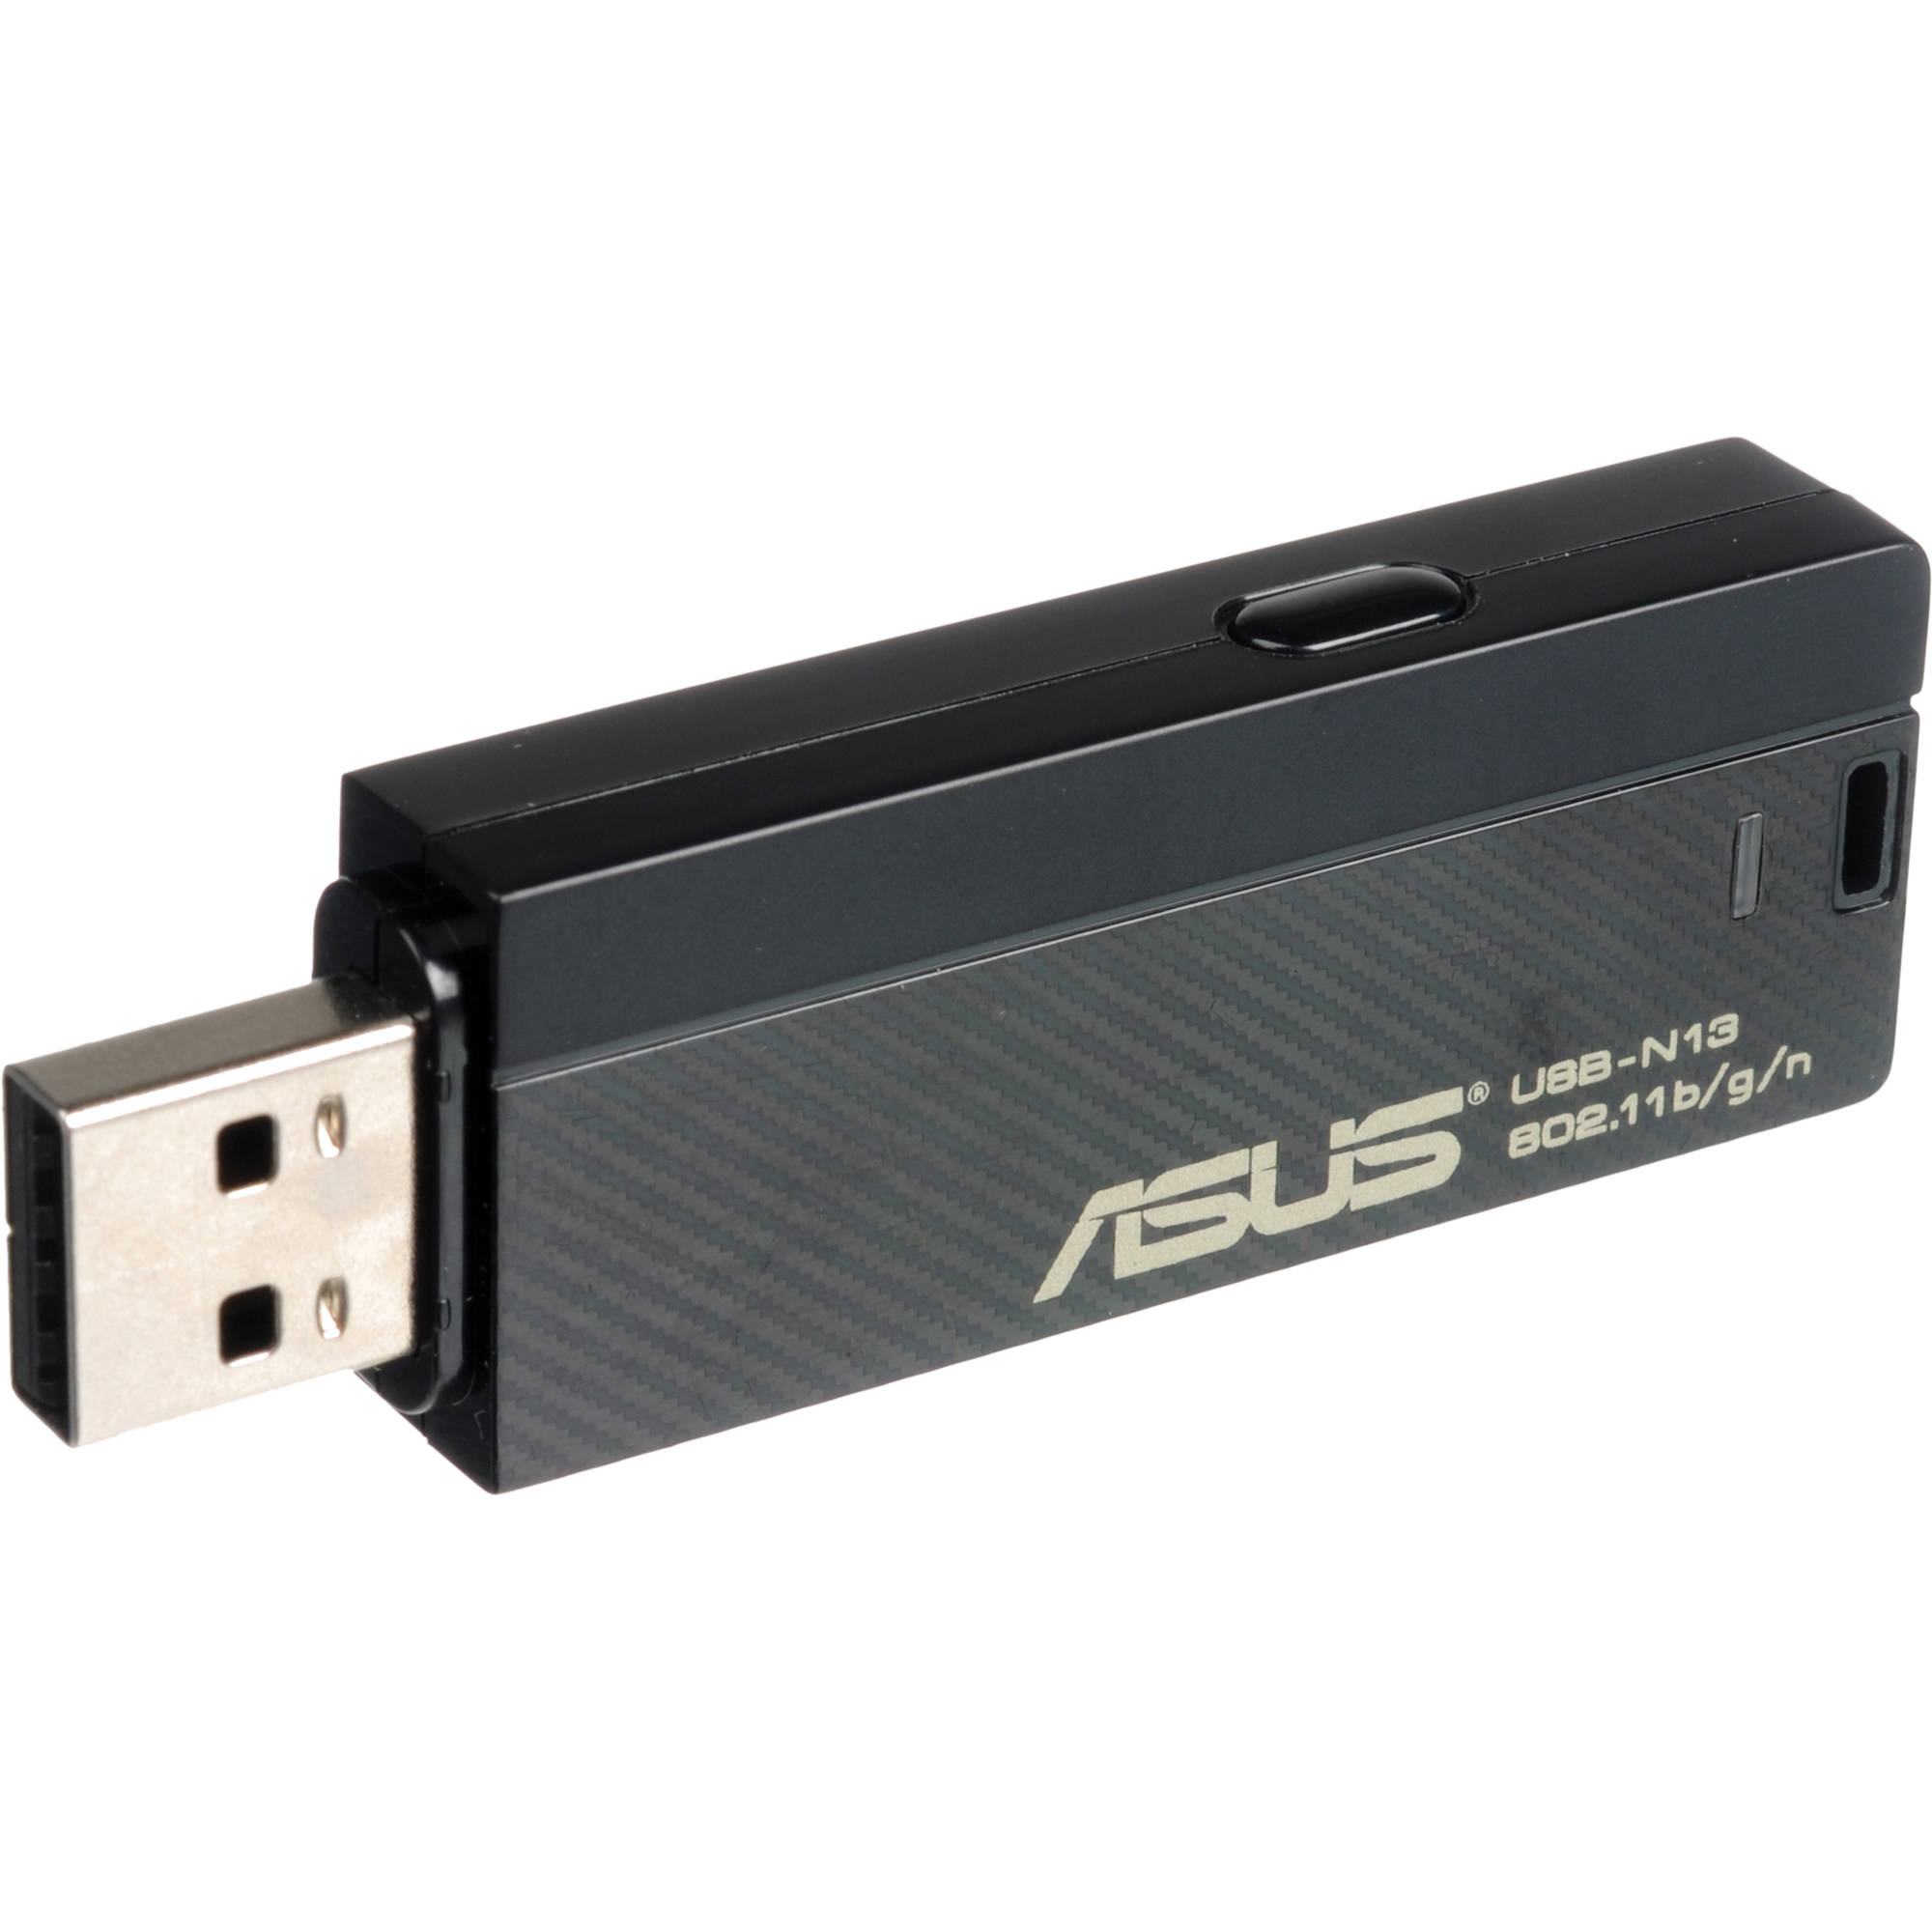 Download usb driver for android